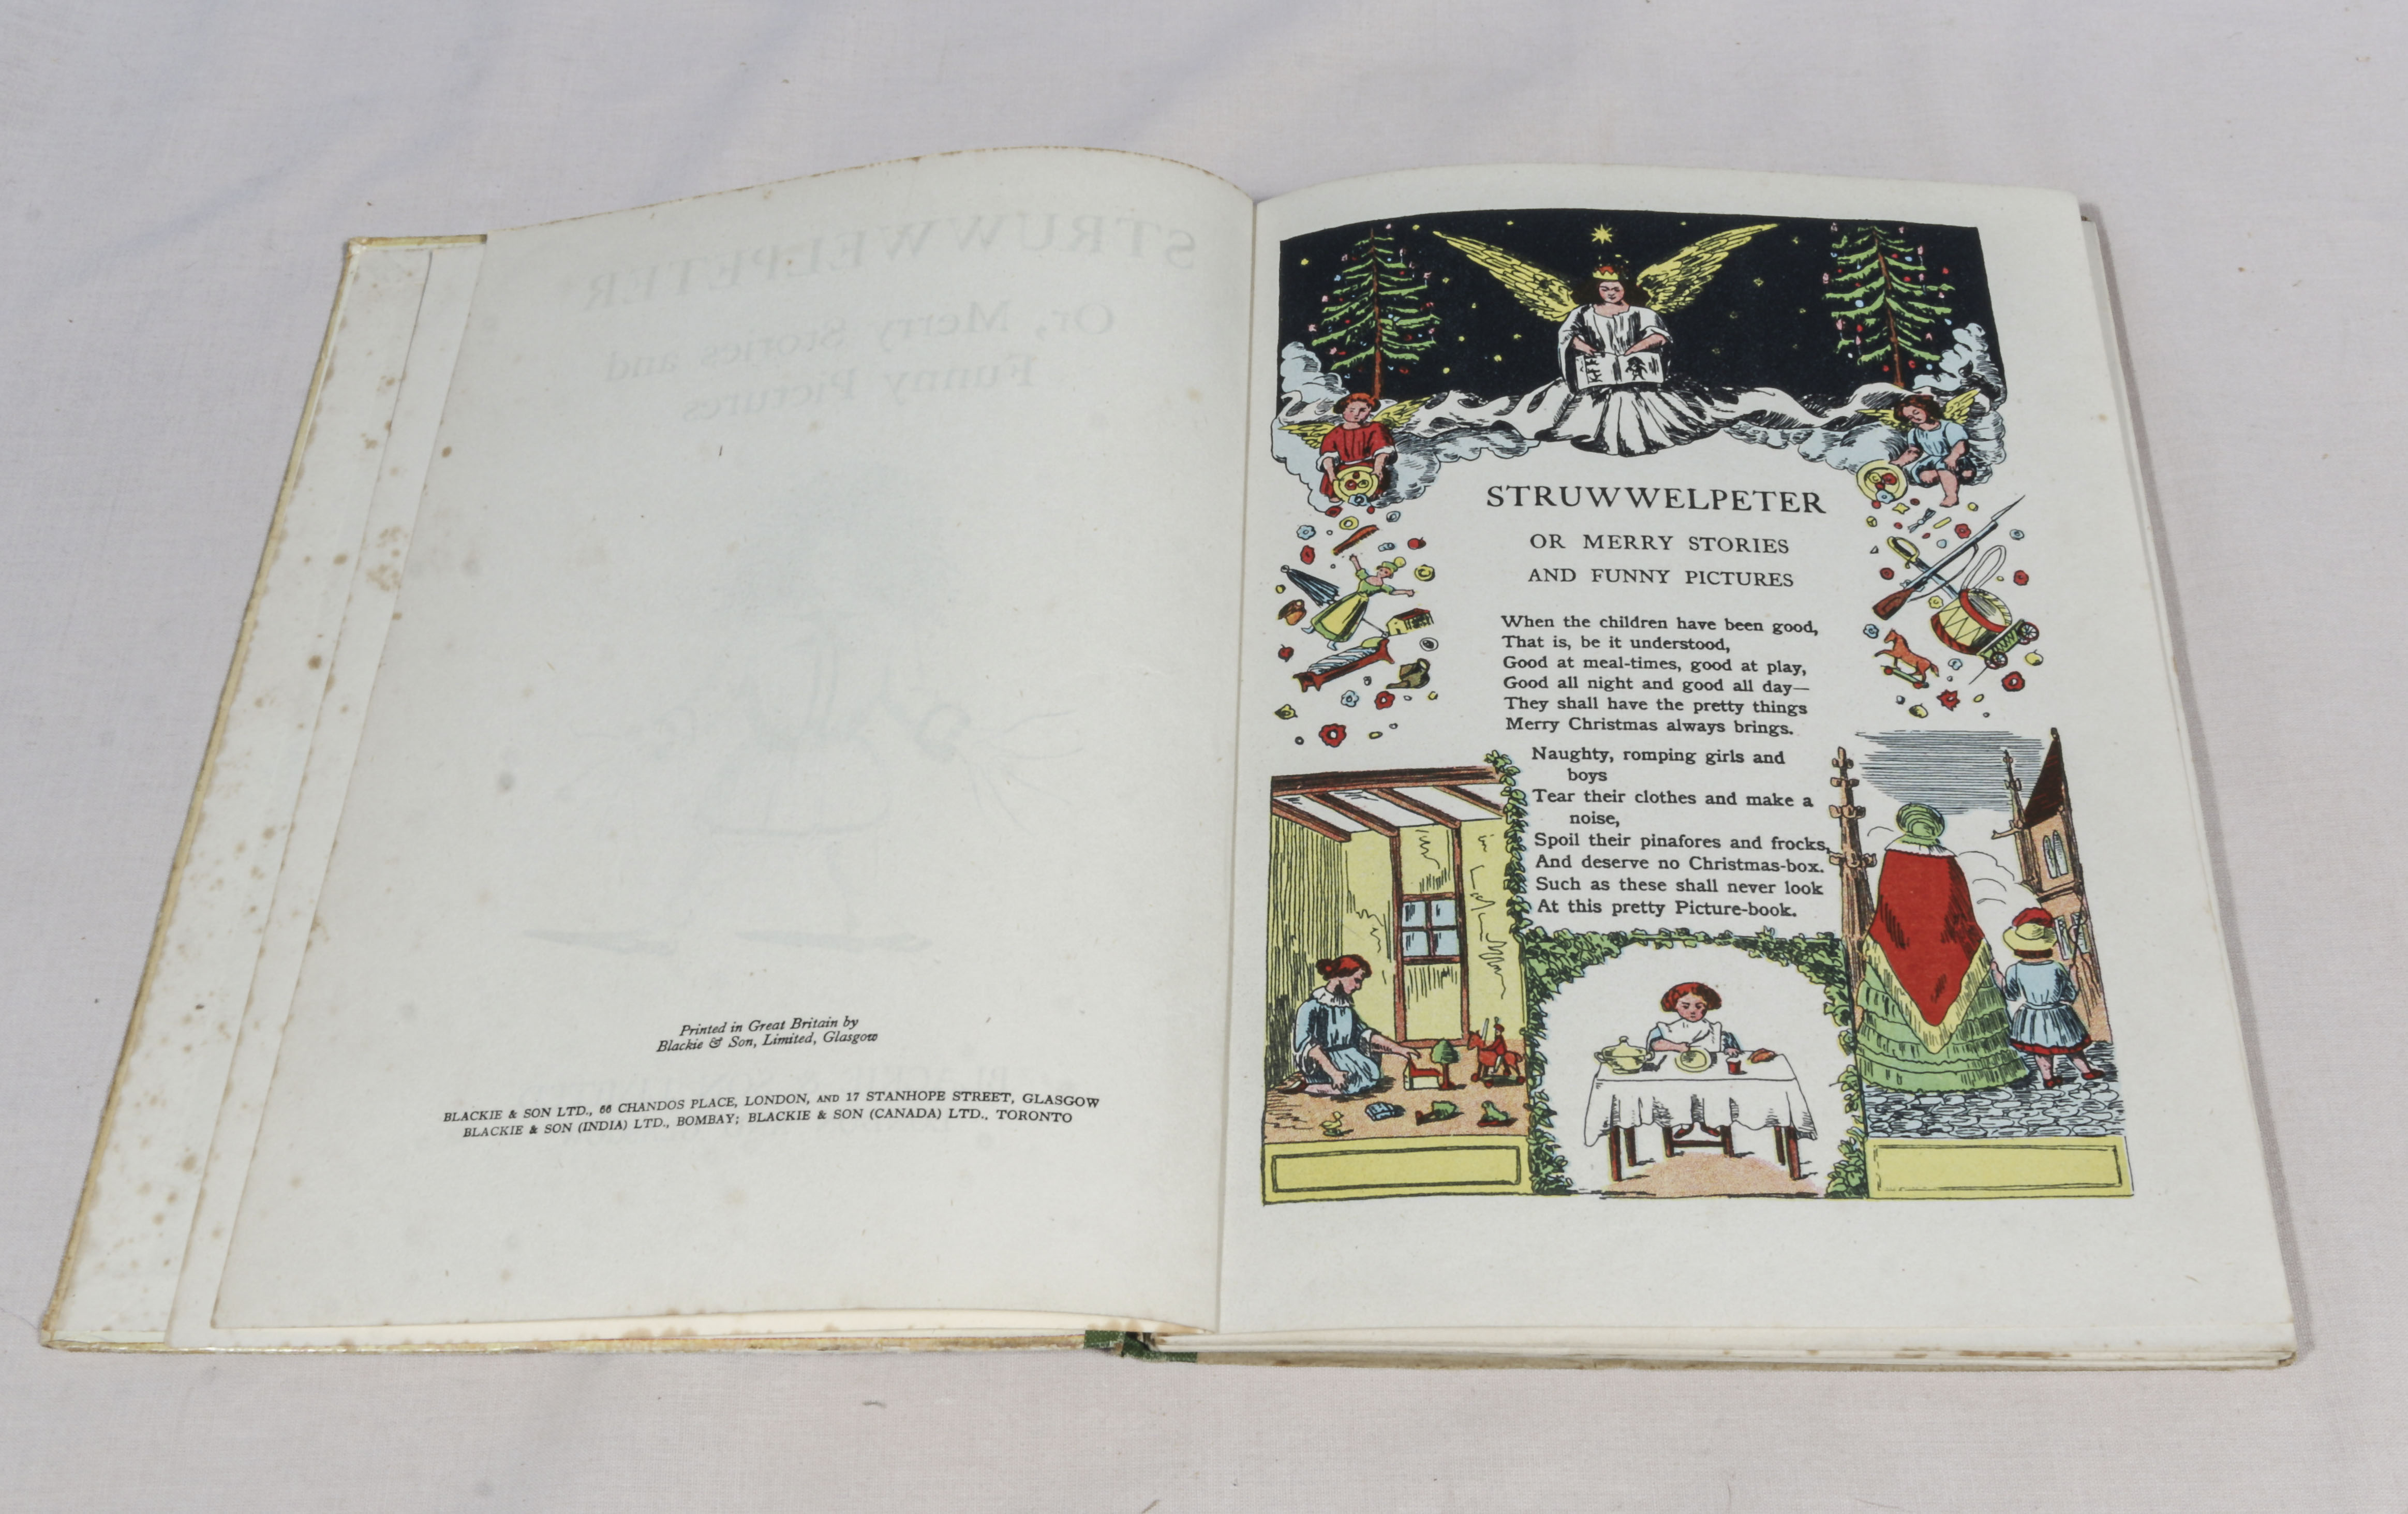 Struwwelpeter, Merry Stories and Funny Pictures. By Heinrich Hoffmann, Published by Blackie and Son. - Image 3 of 6